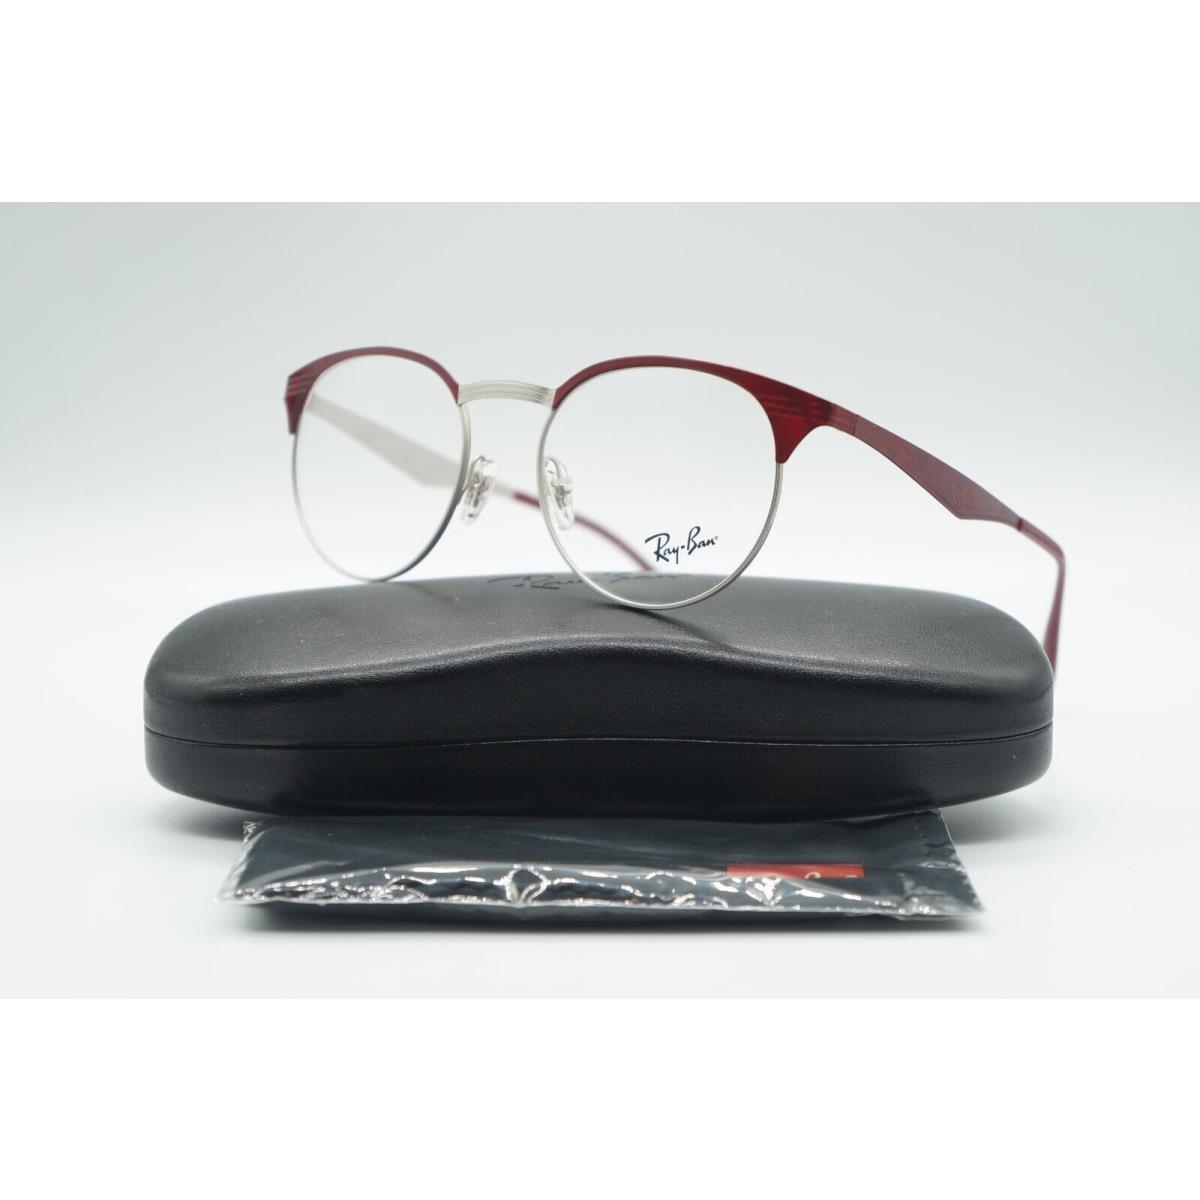 Ray-ban RB 6406 3024 Red Move ON Silver Frame Eyeglasses 51-18